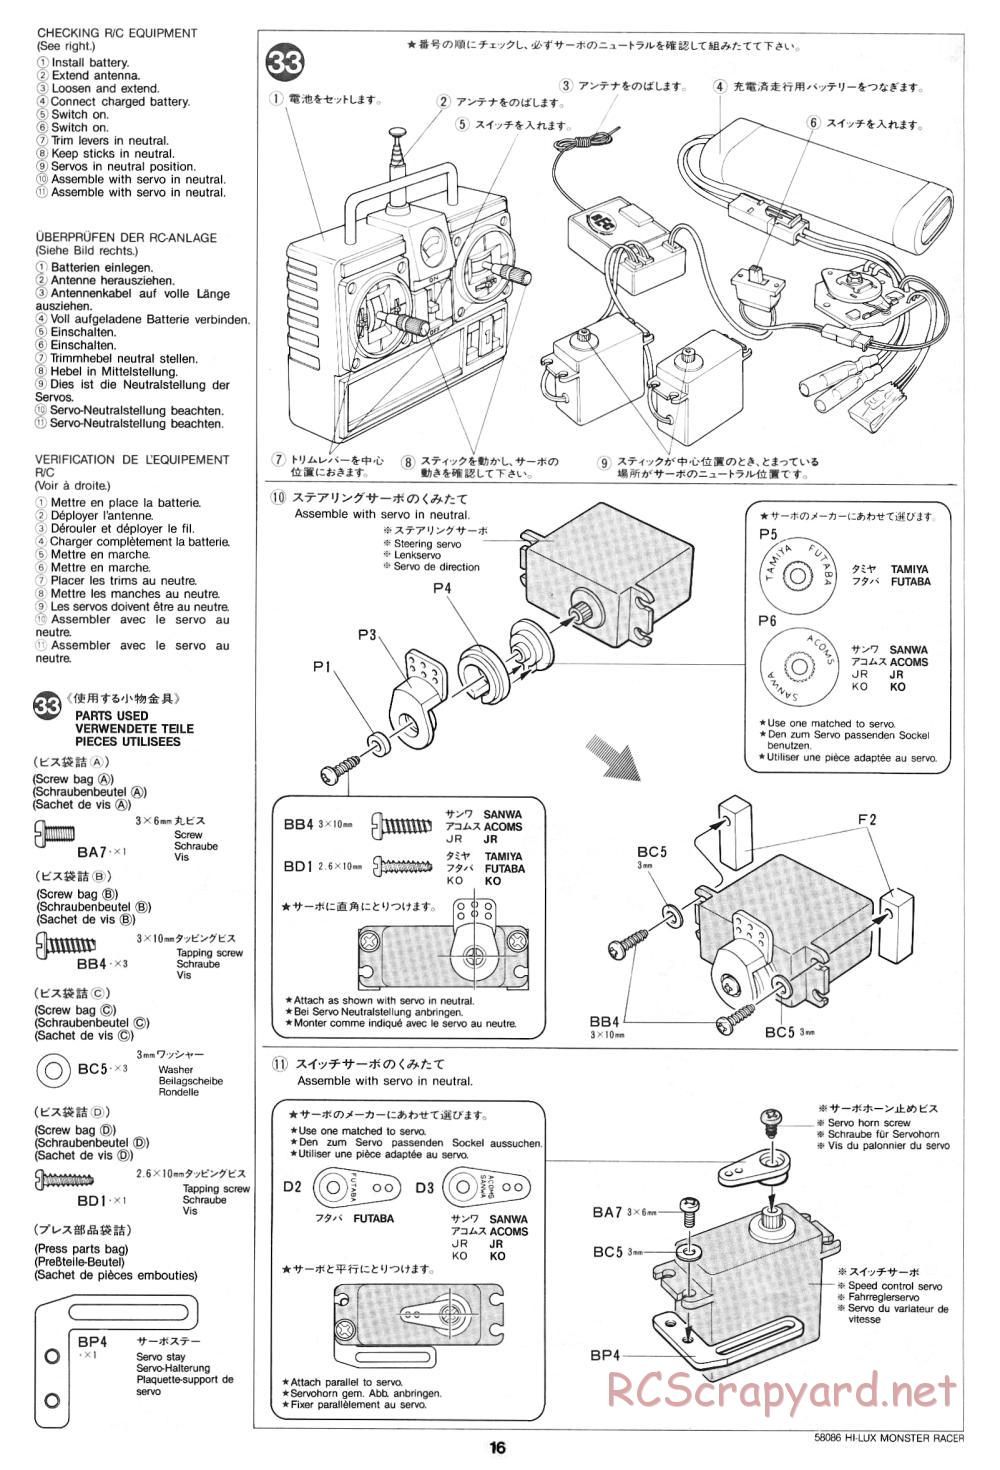 Tamiya - Toyota Hilux Monster Racer - 58086 - Manual - Page 16